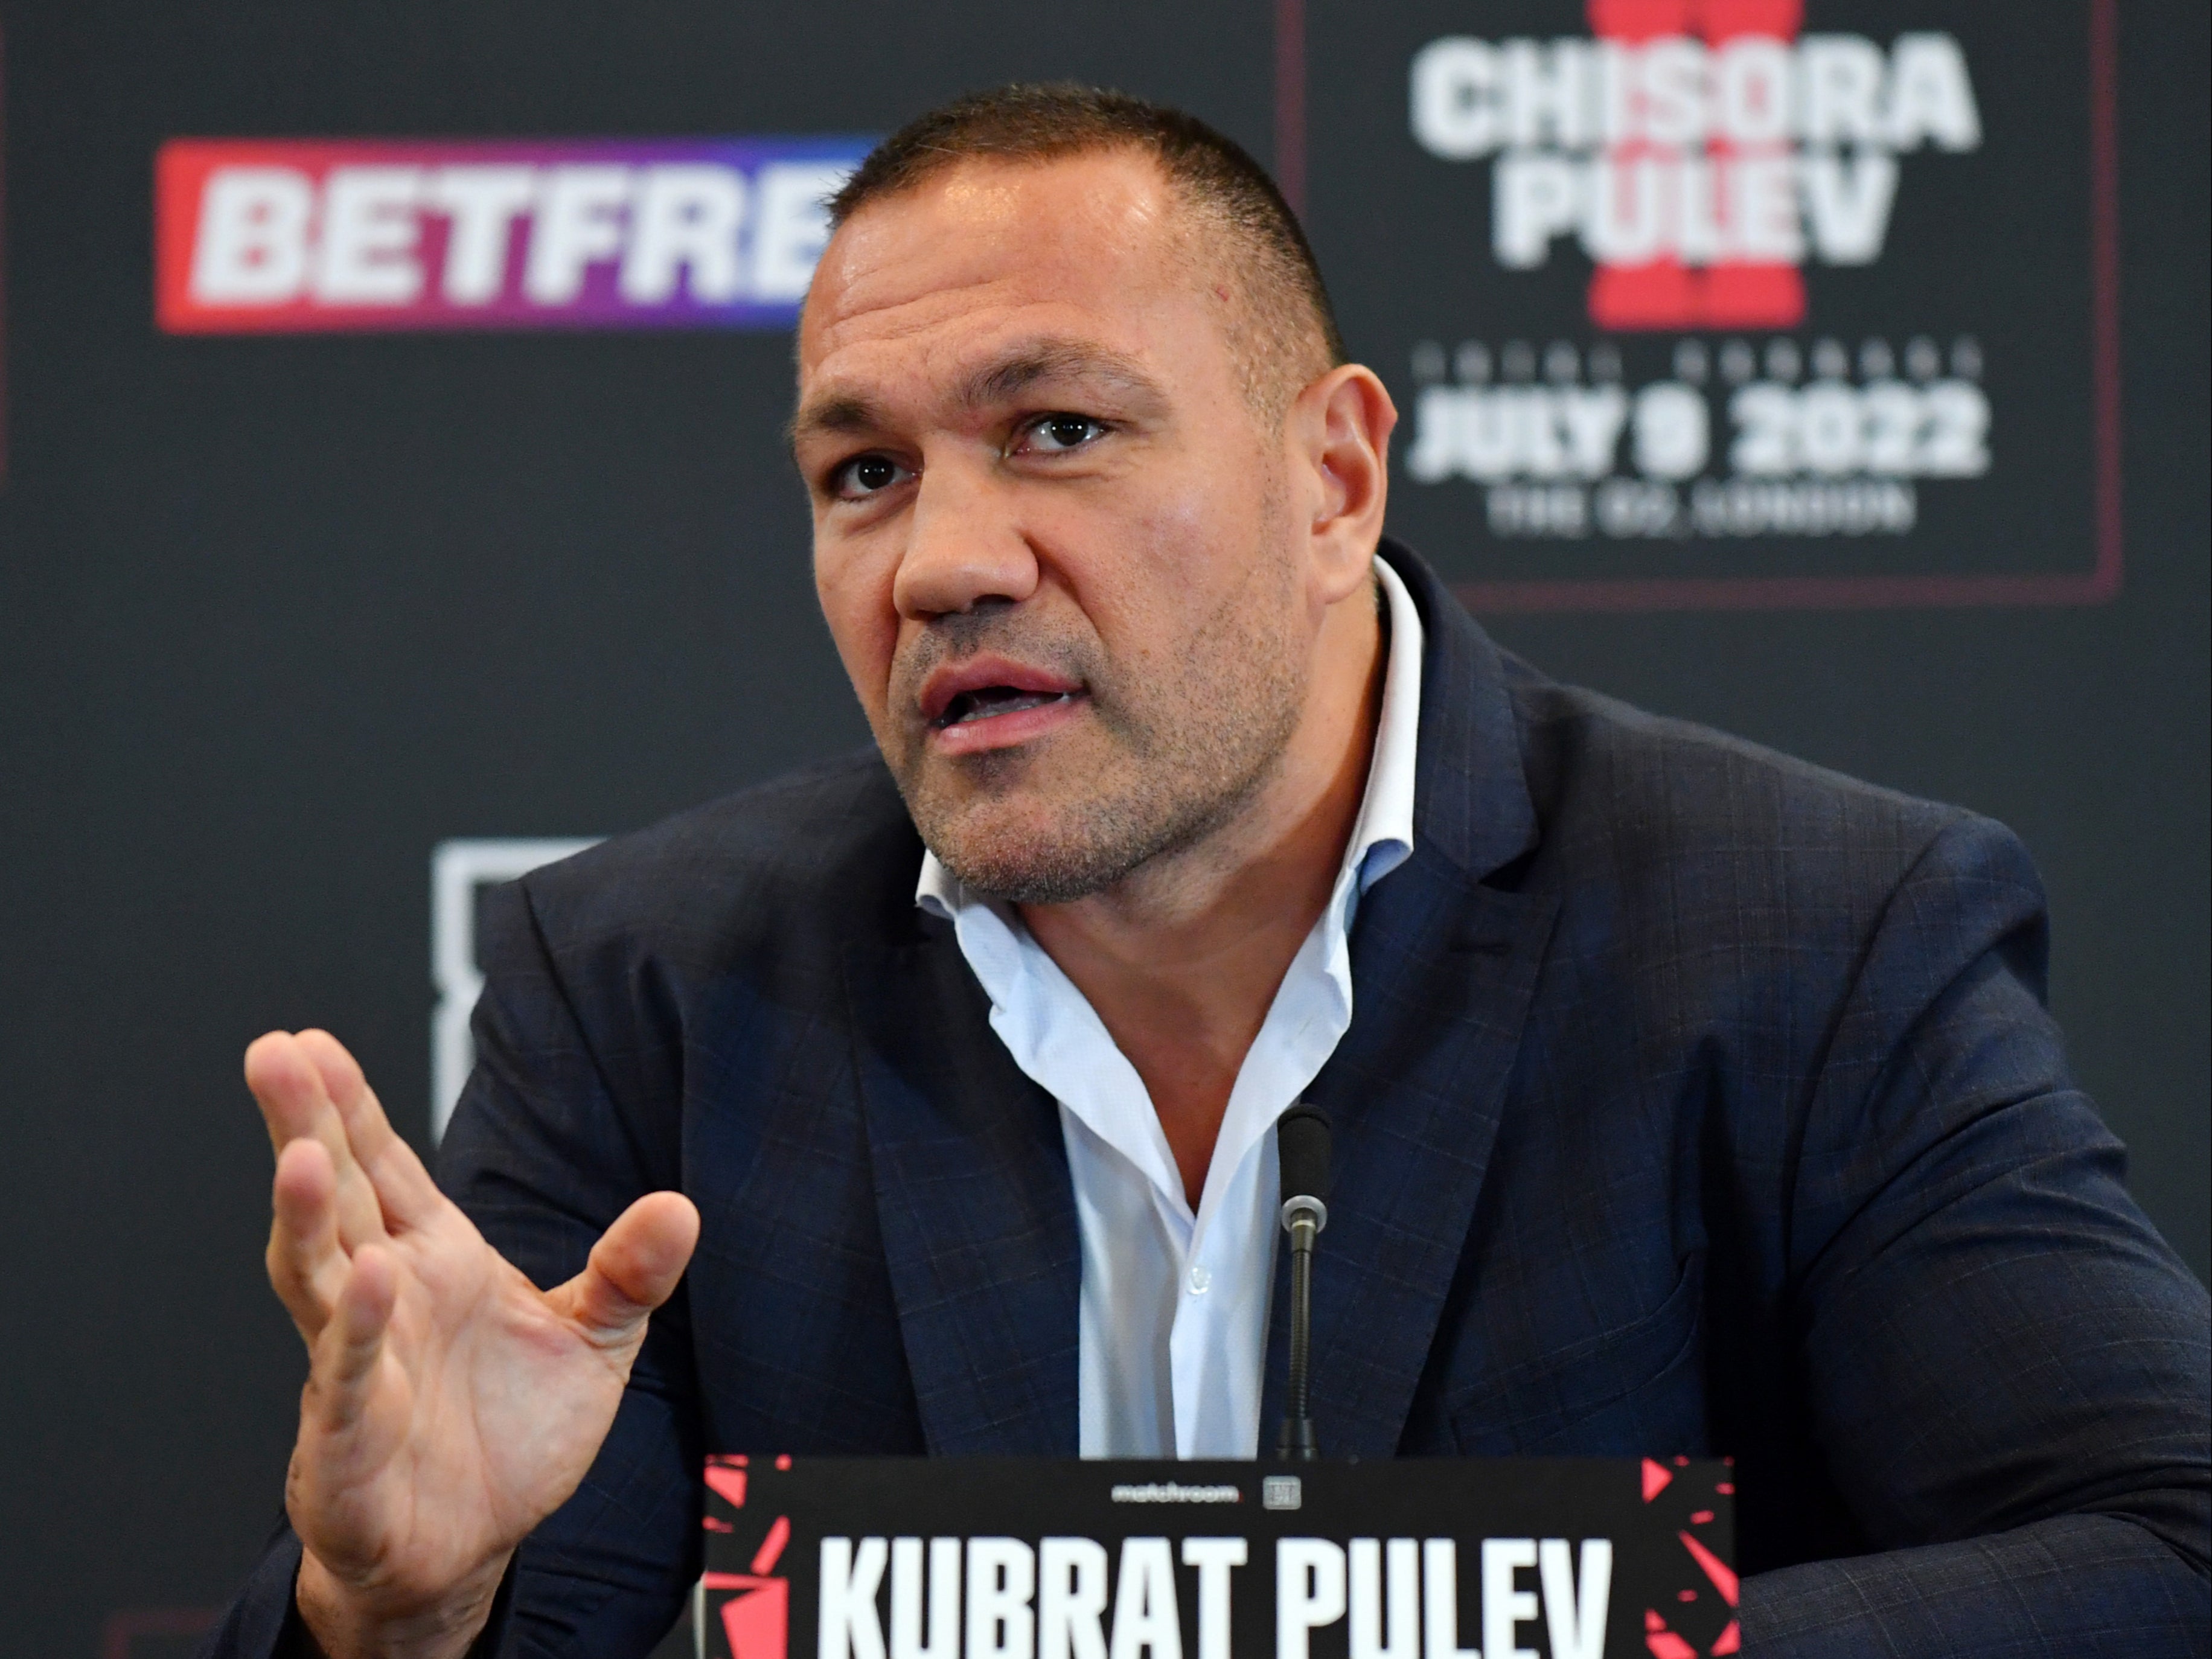 Kubrat Pulev and Derek Chisora will square off at the O2 Arena on 9 July